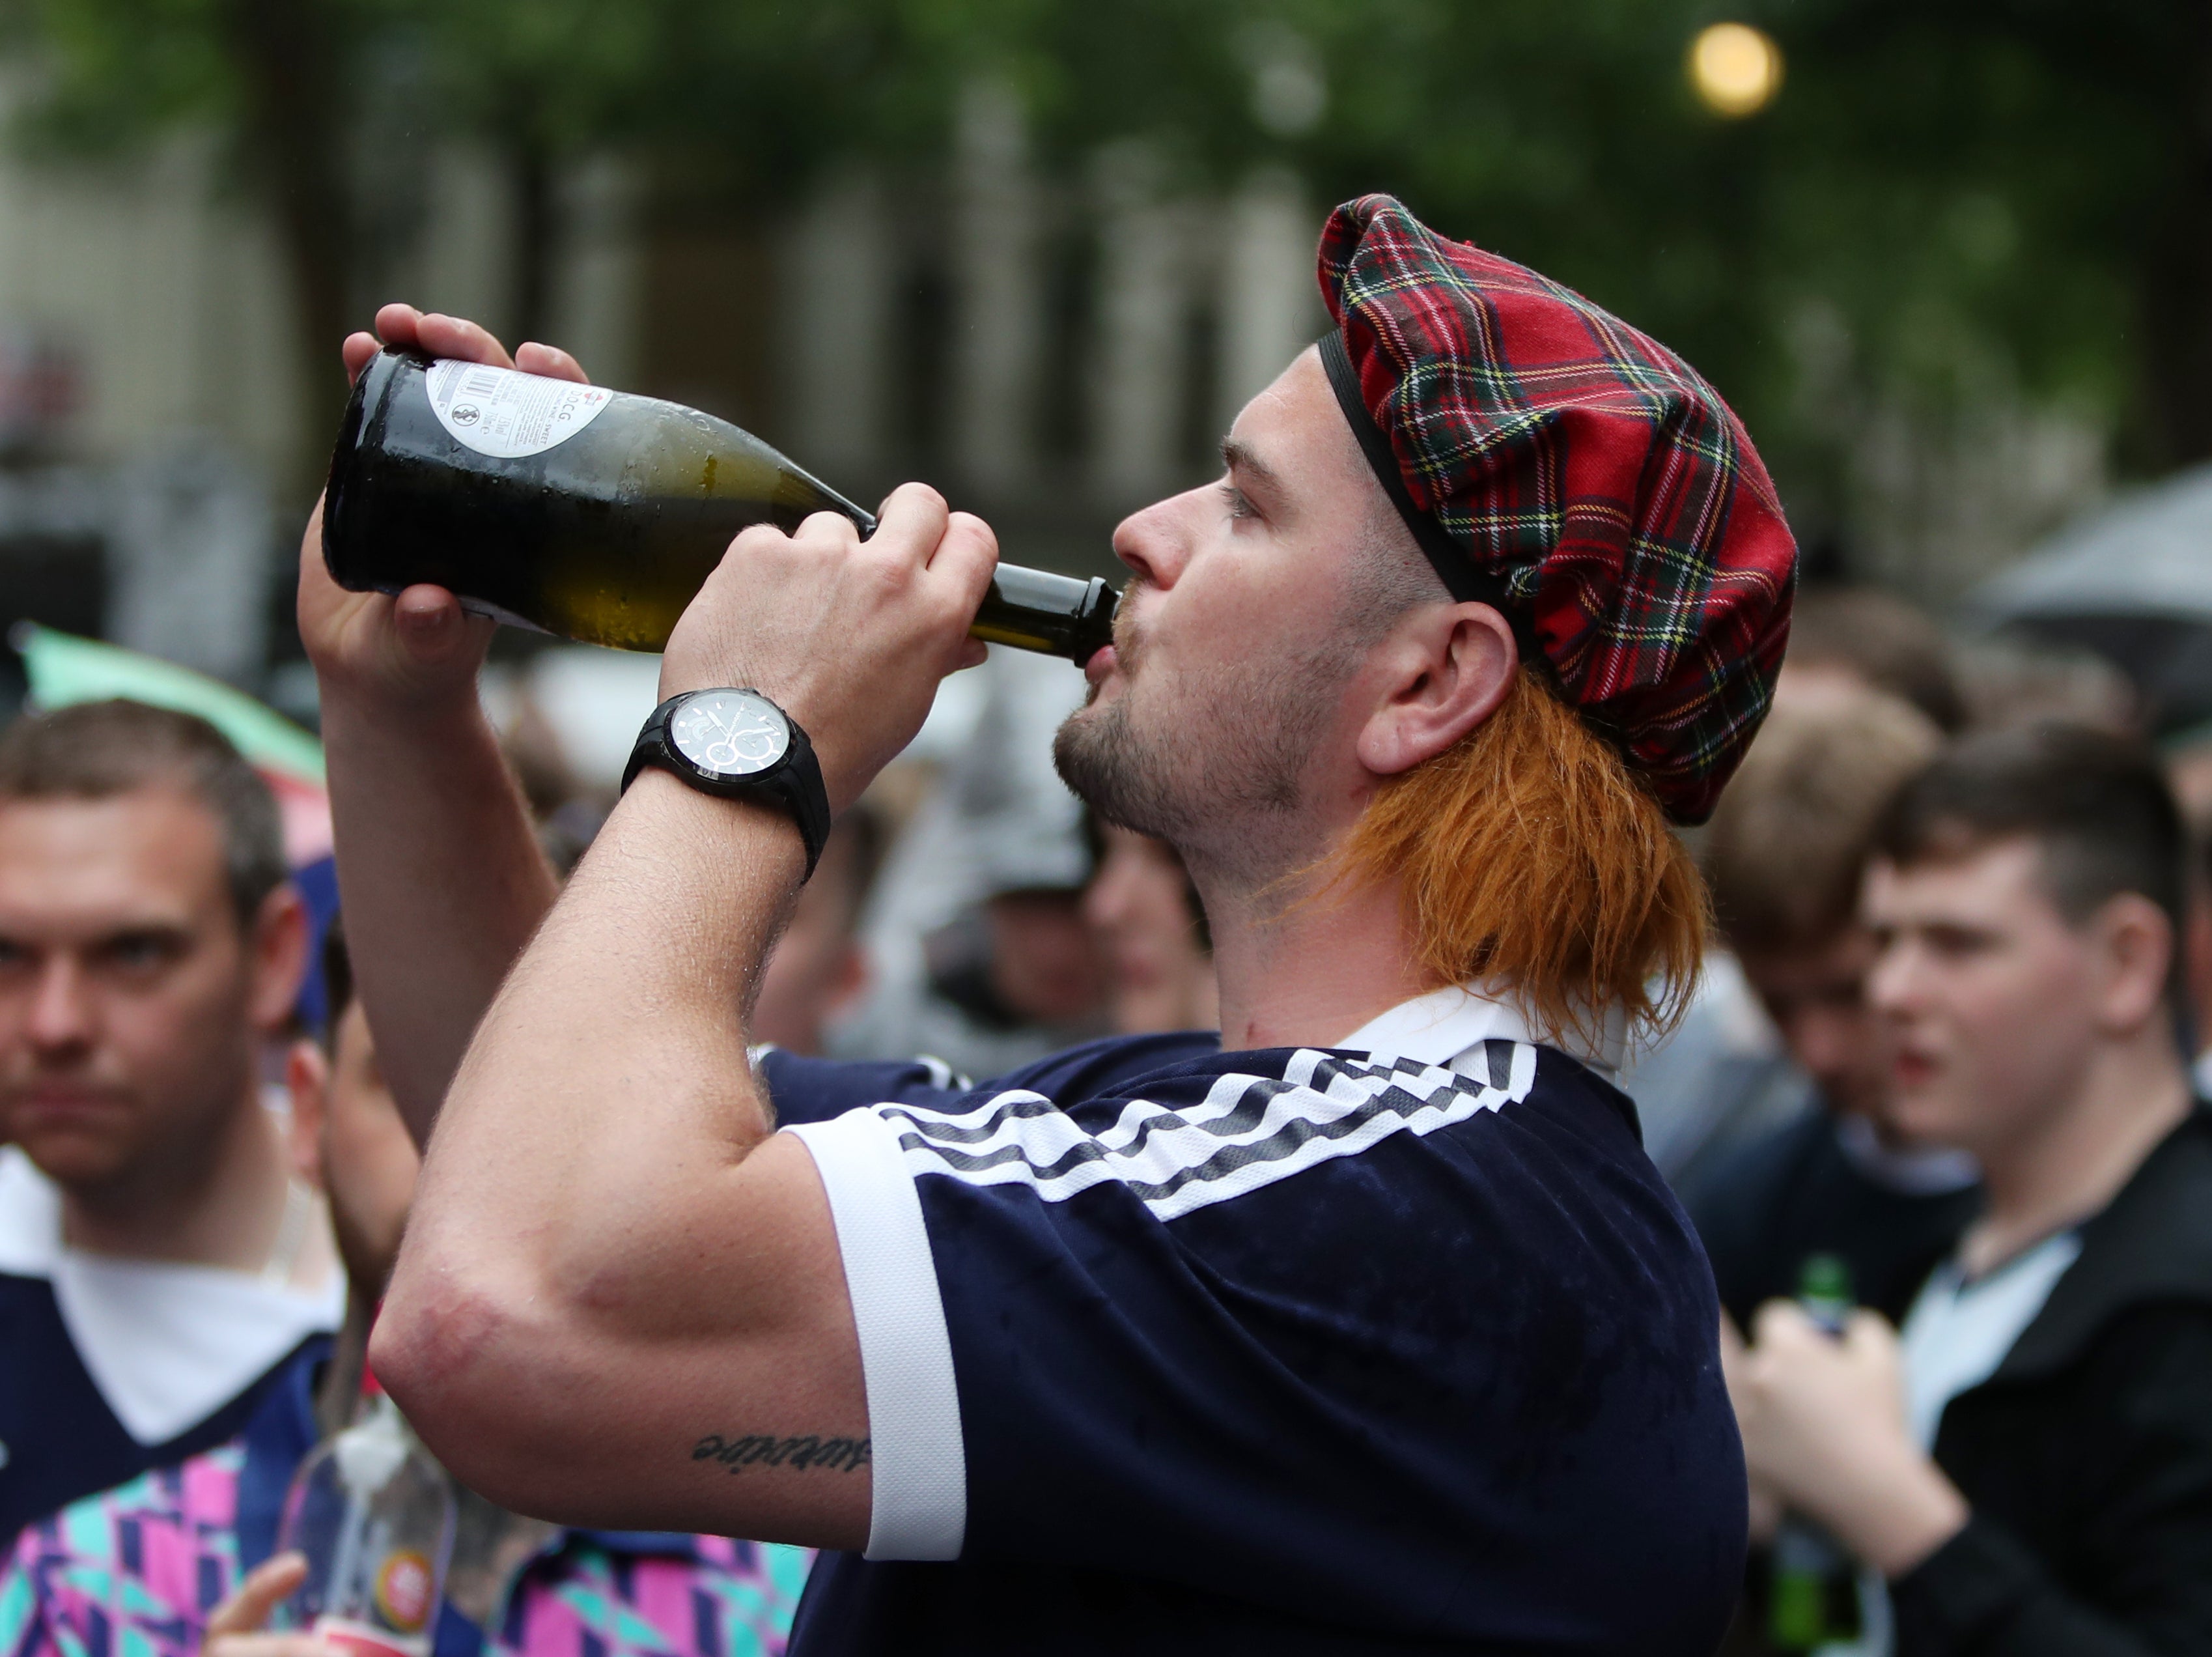 Scotland fans gather in Leicester Square before England vs Scotland match at Euro 2020